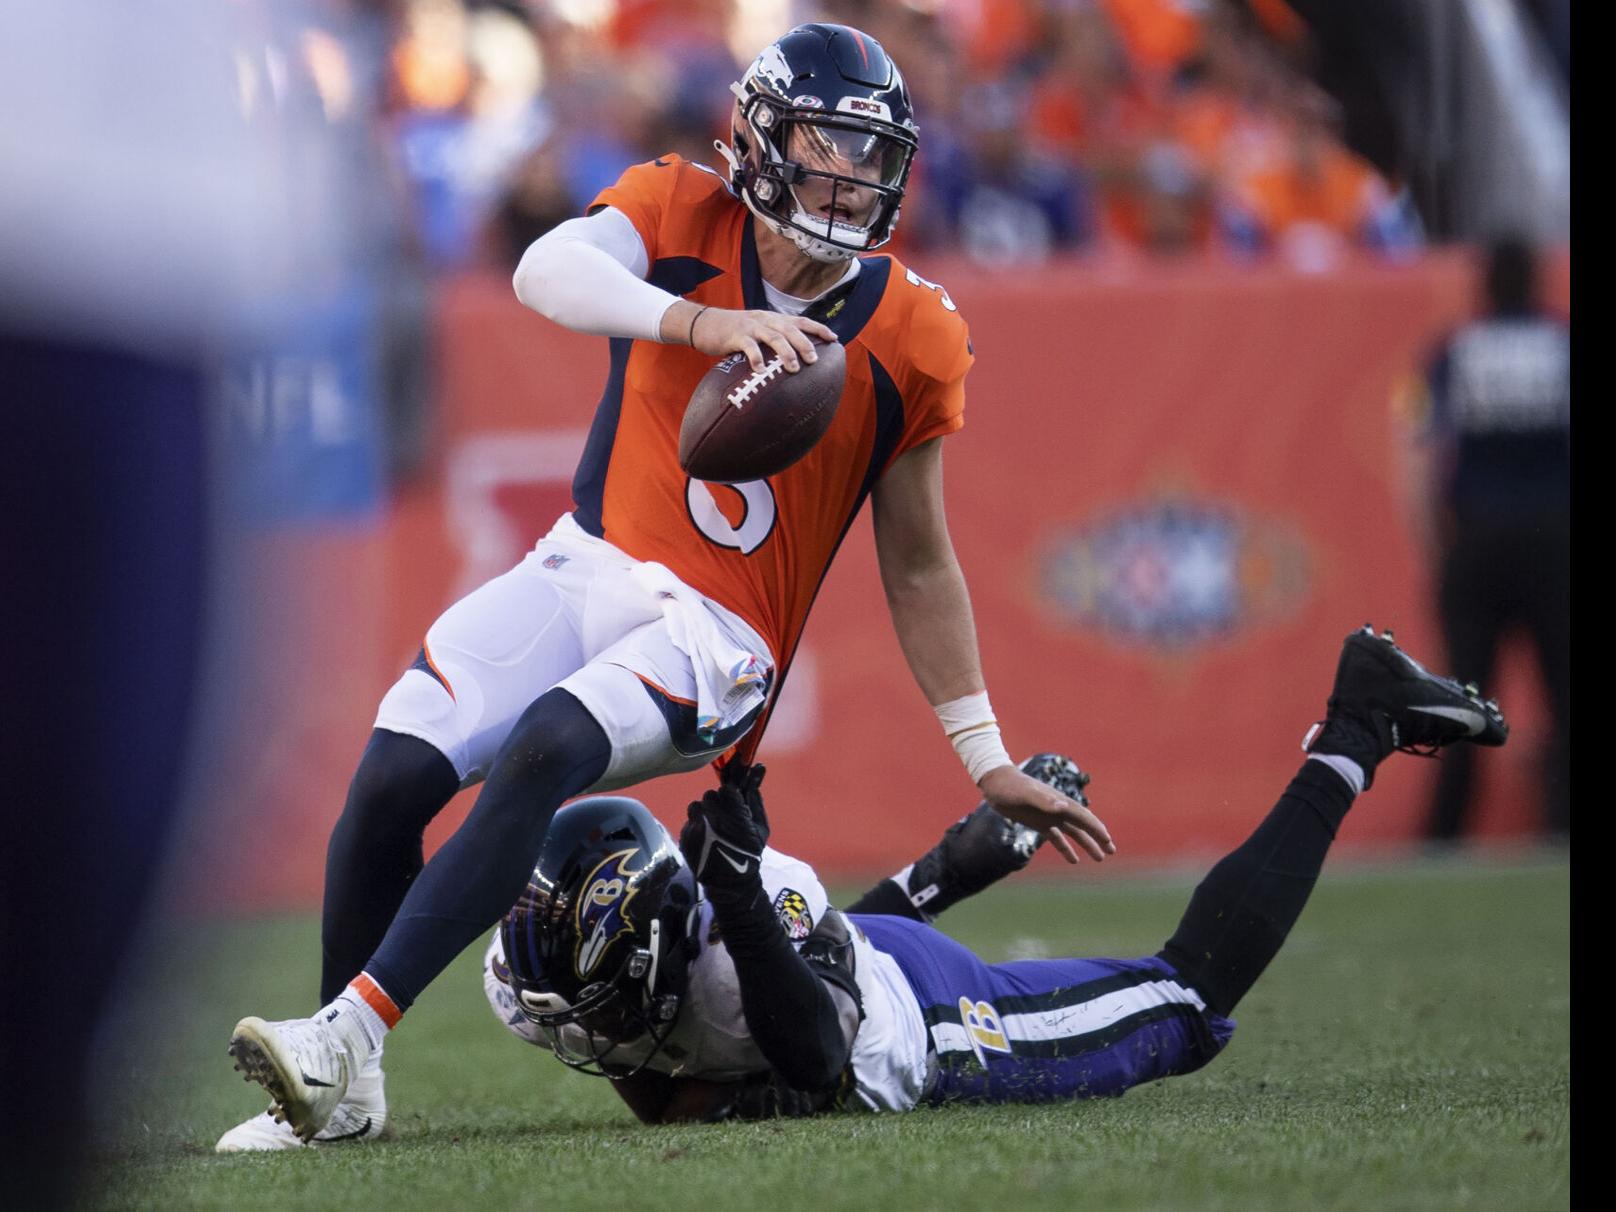 Drew Lock vs. Teddy Bridgewater: Who will have the better Broncos season in  our Madden NFL 22 simulation? – The Denver Post